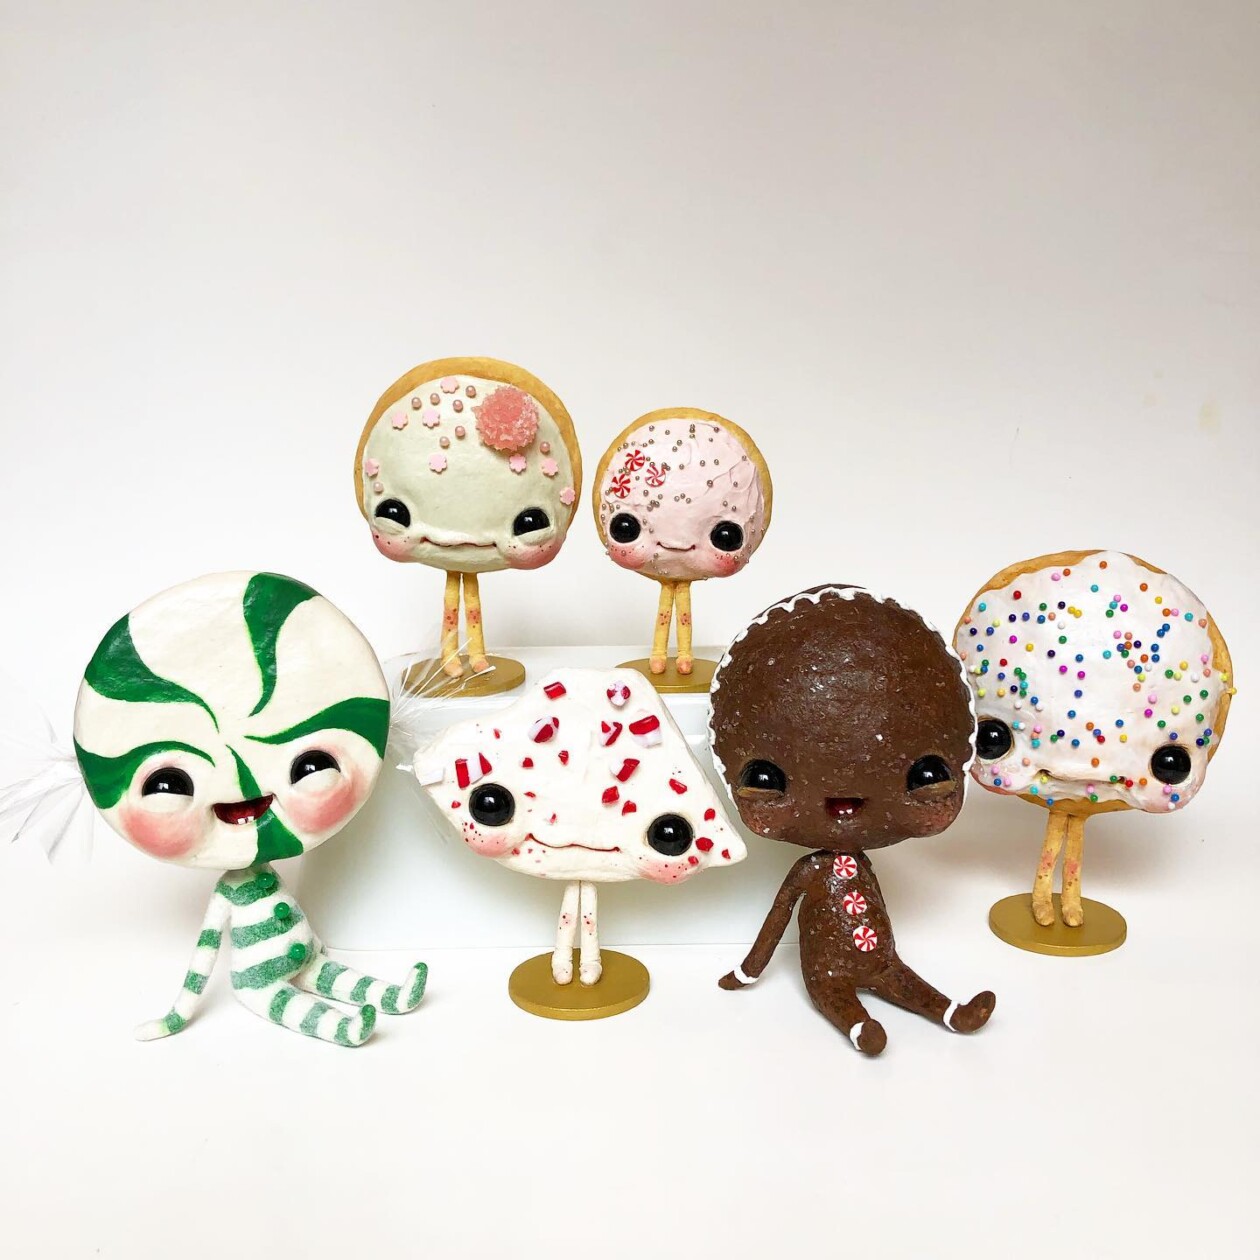 Cute And Creepy Little Monster Toys By Sara Duarte (11)